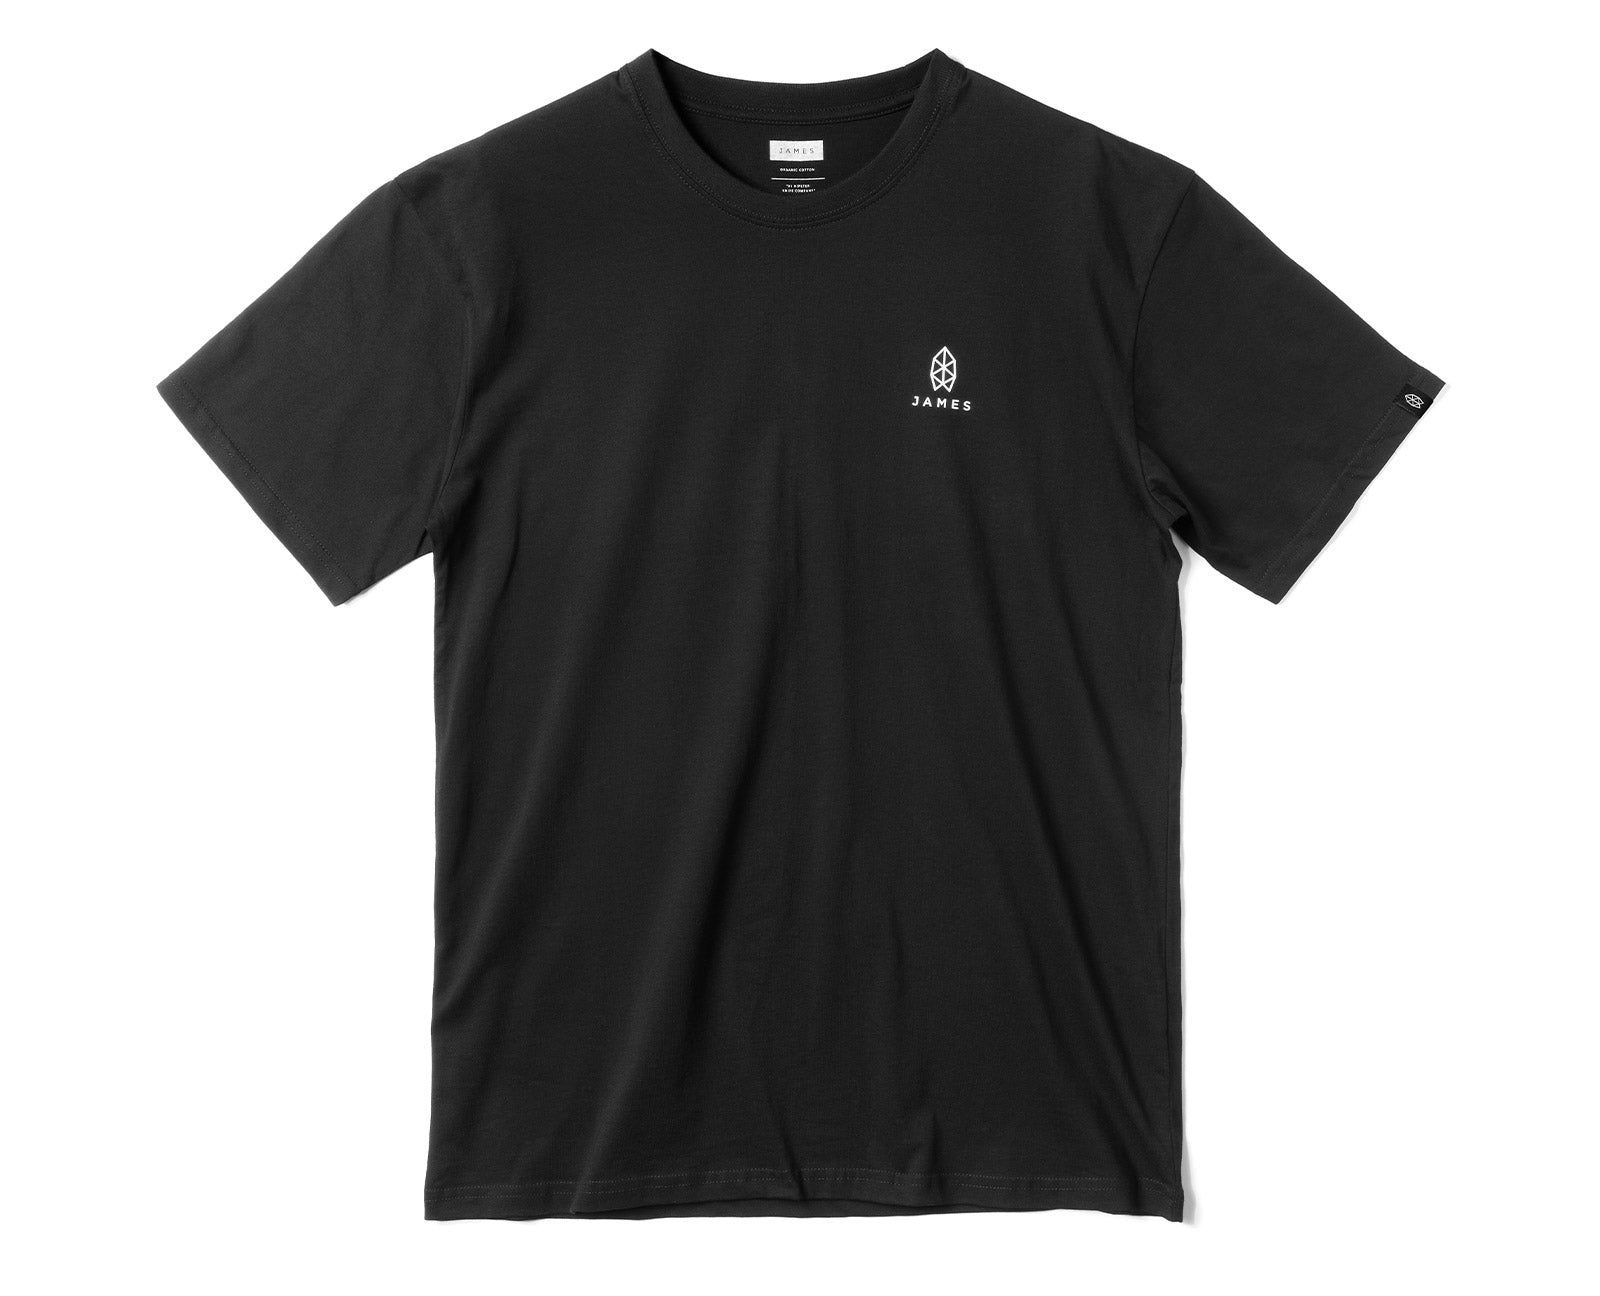 Front of black t-shirt